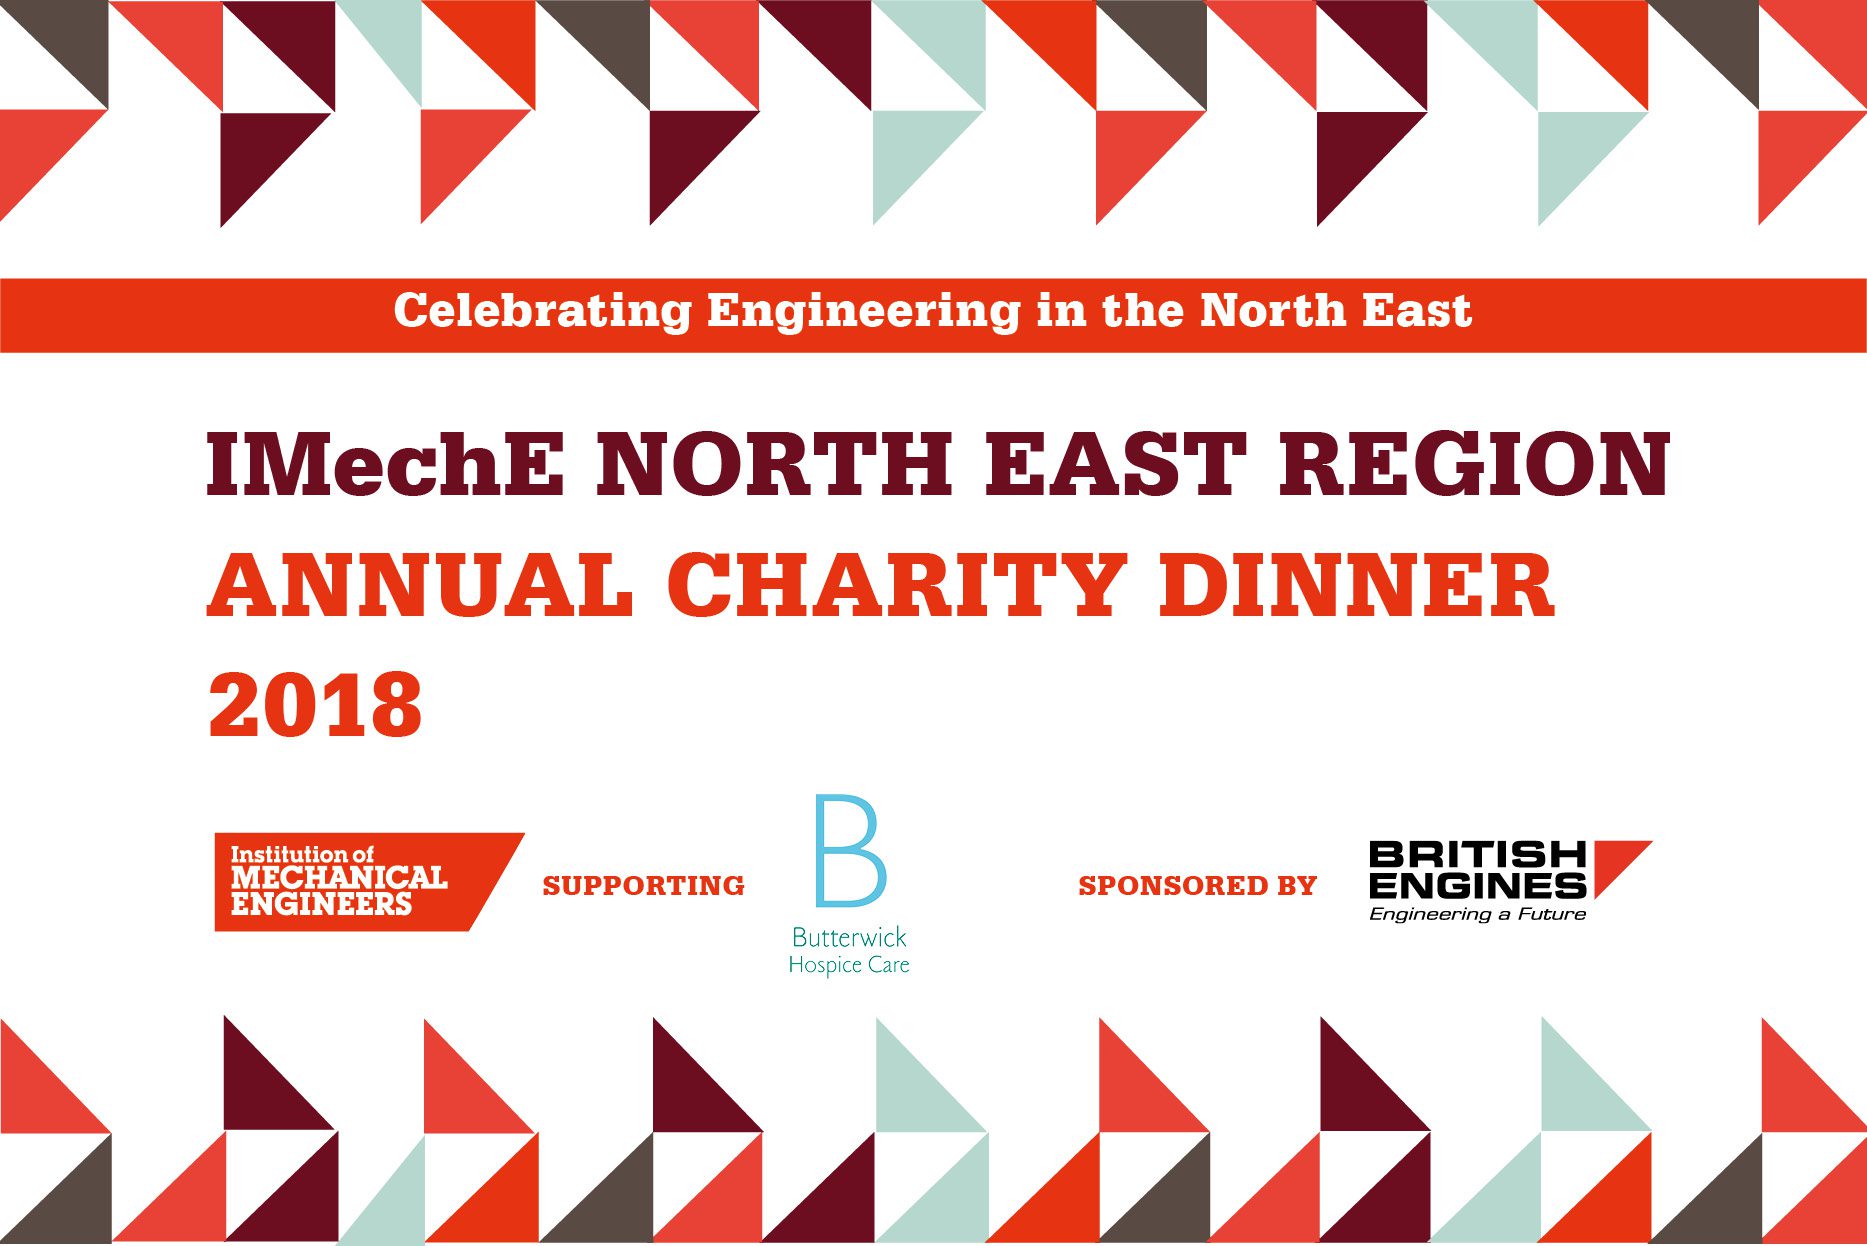 The menu from this year's Institution of Mechanical Engineers North East Annual Charity Dinner